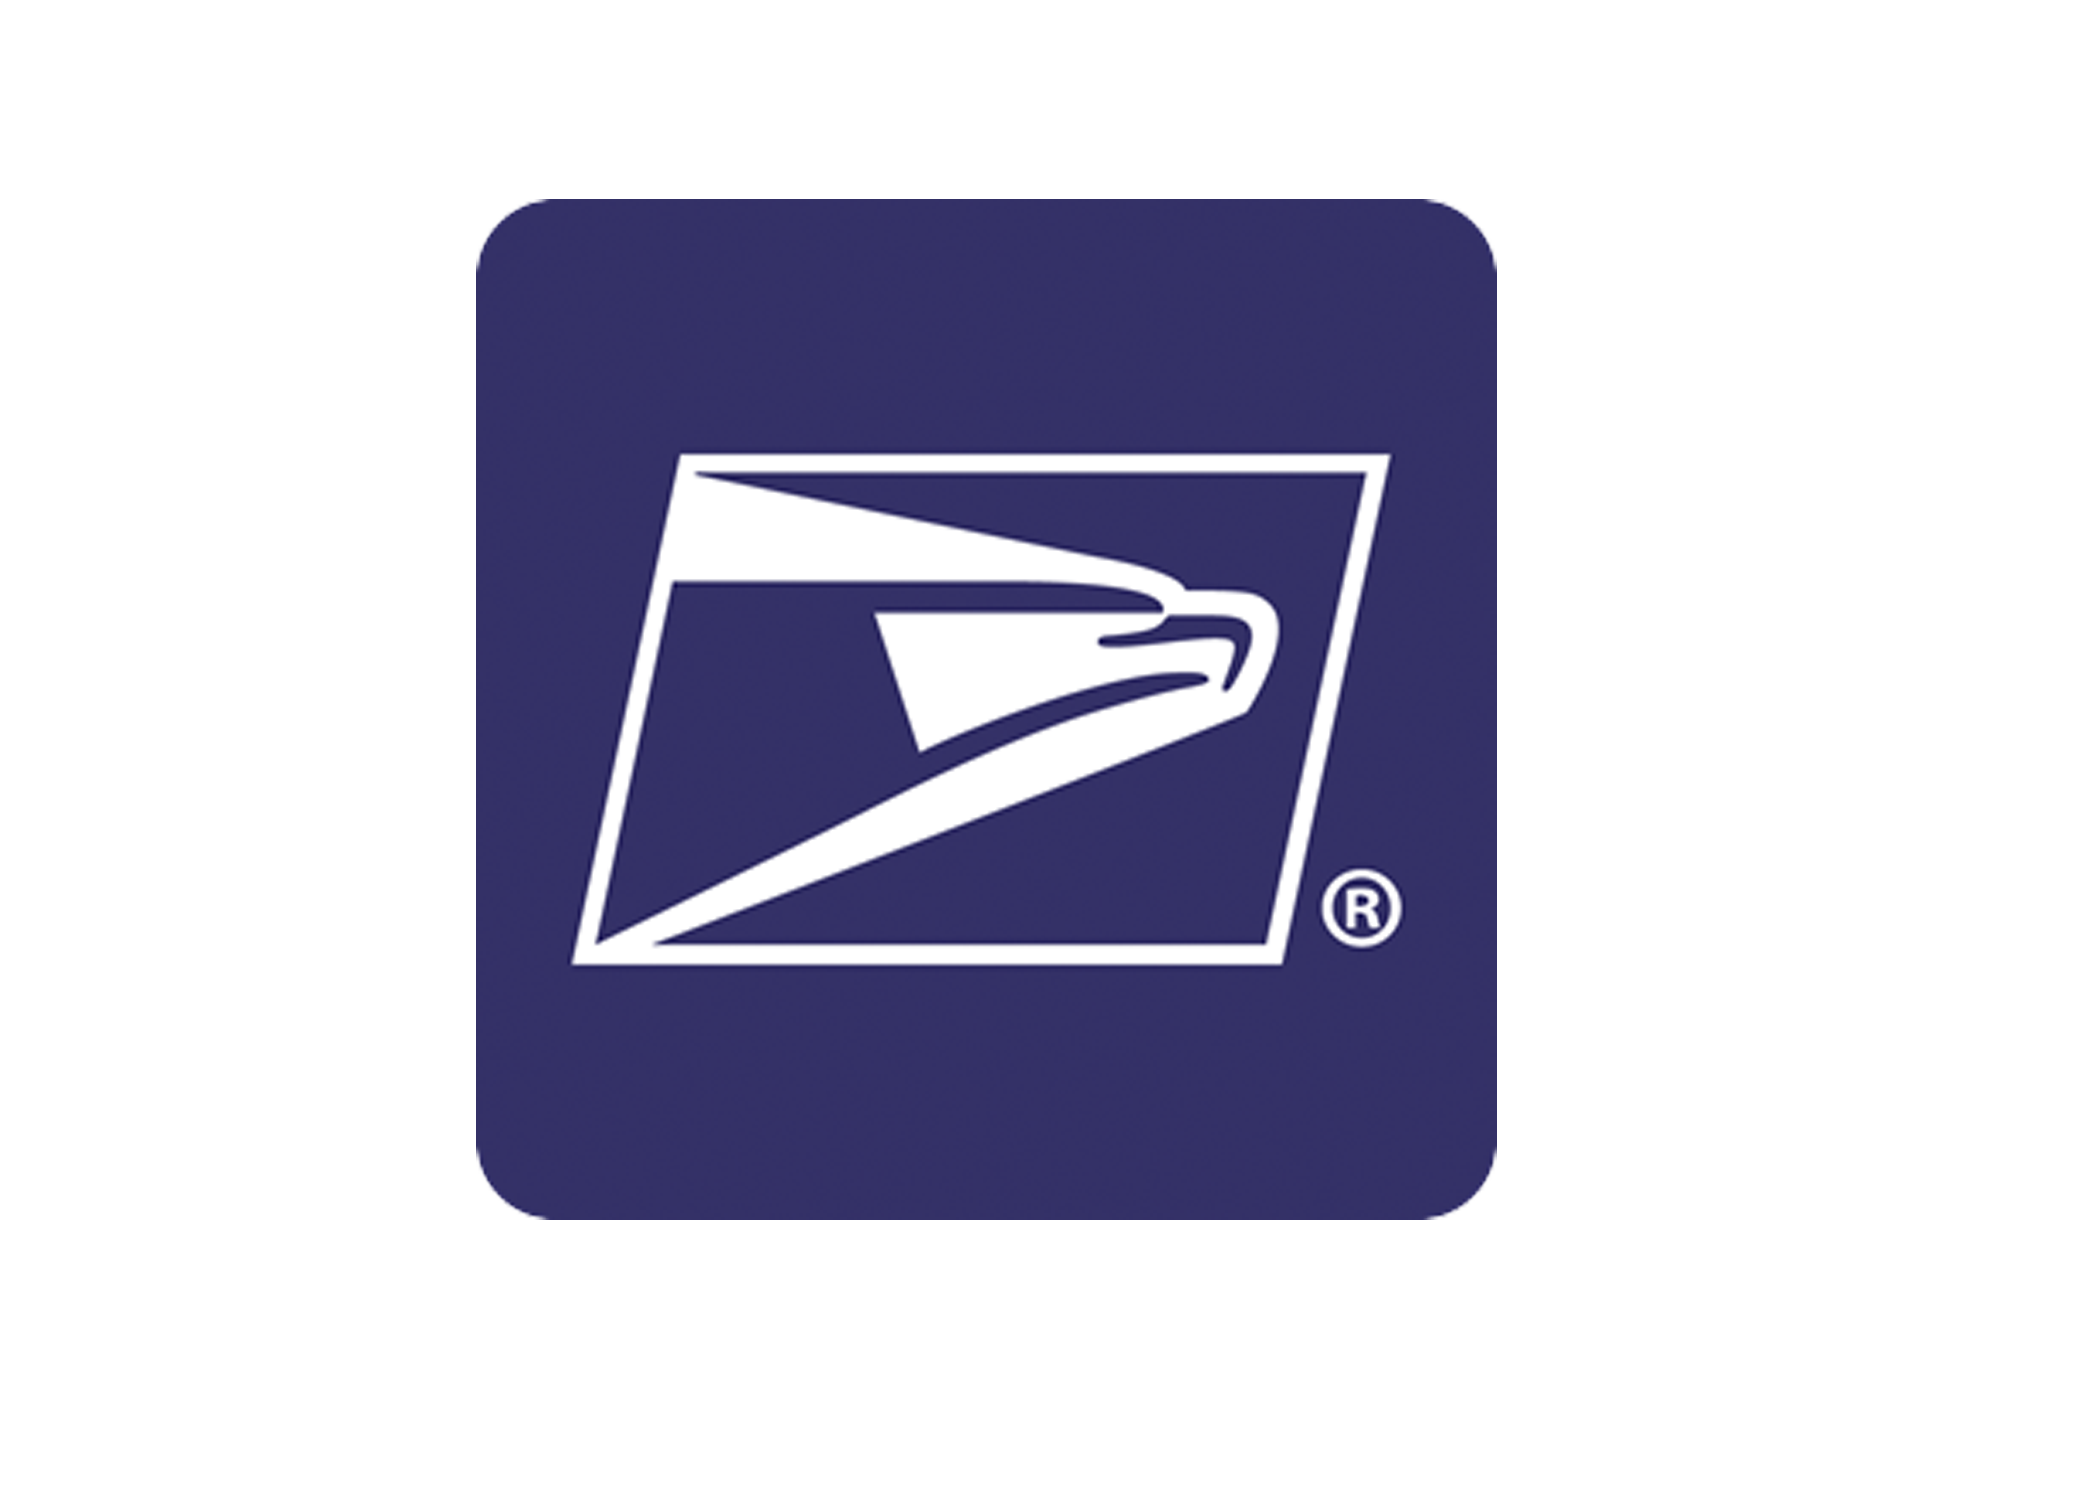 USPS.png